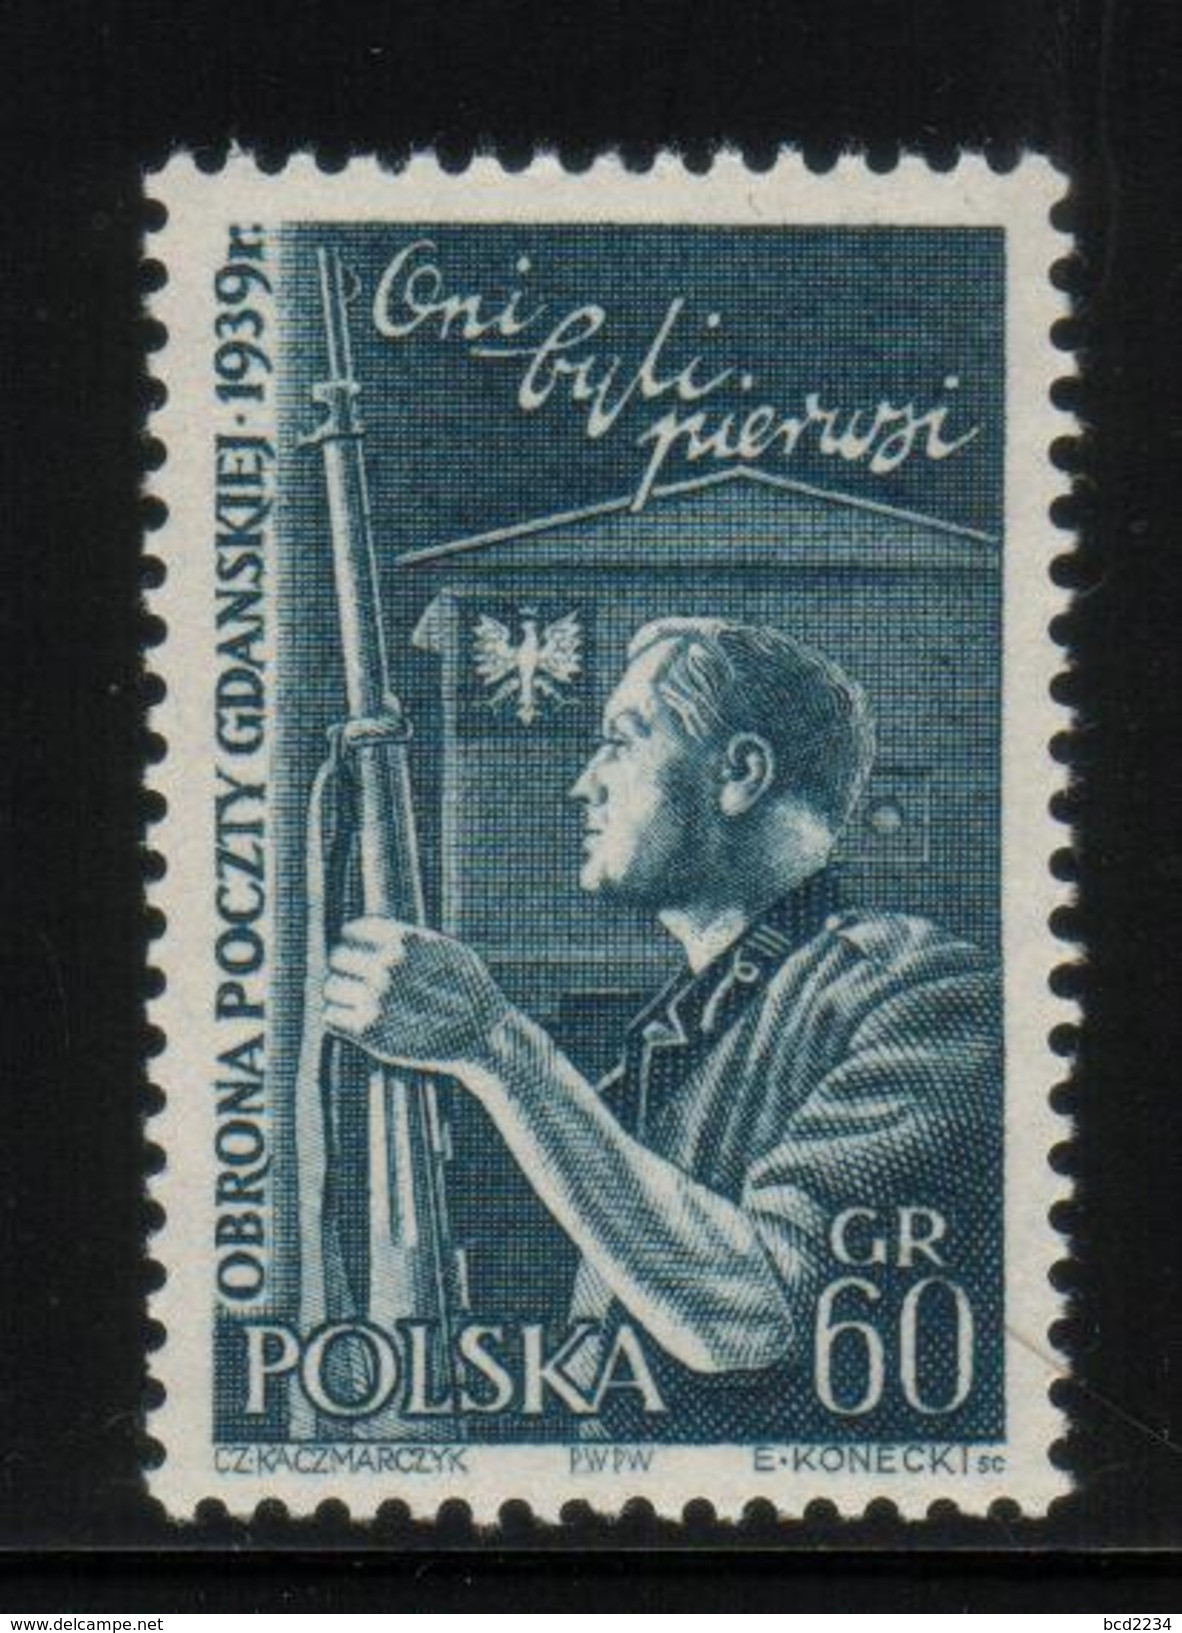 POLAND 1958 WW2 DEFENCE OF GDANSK POST OFFICE FROM NAZI GERMANY NHM Gun Rifle Postman POLEN POLOGNE DANZIG - Unused Stamps